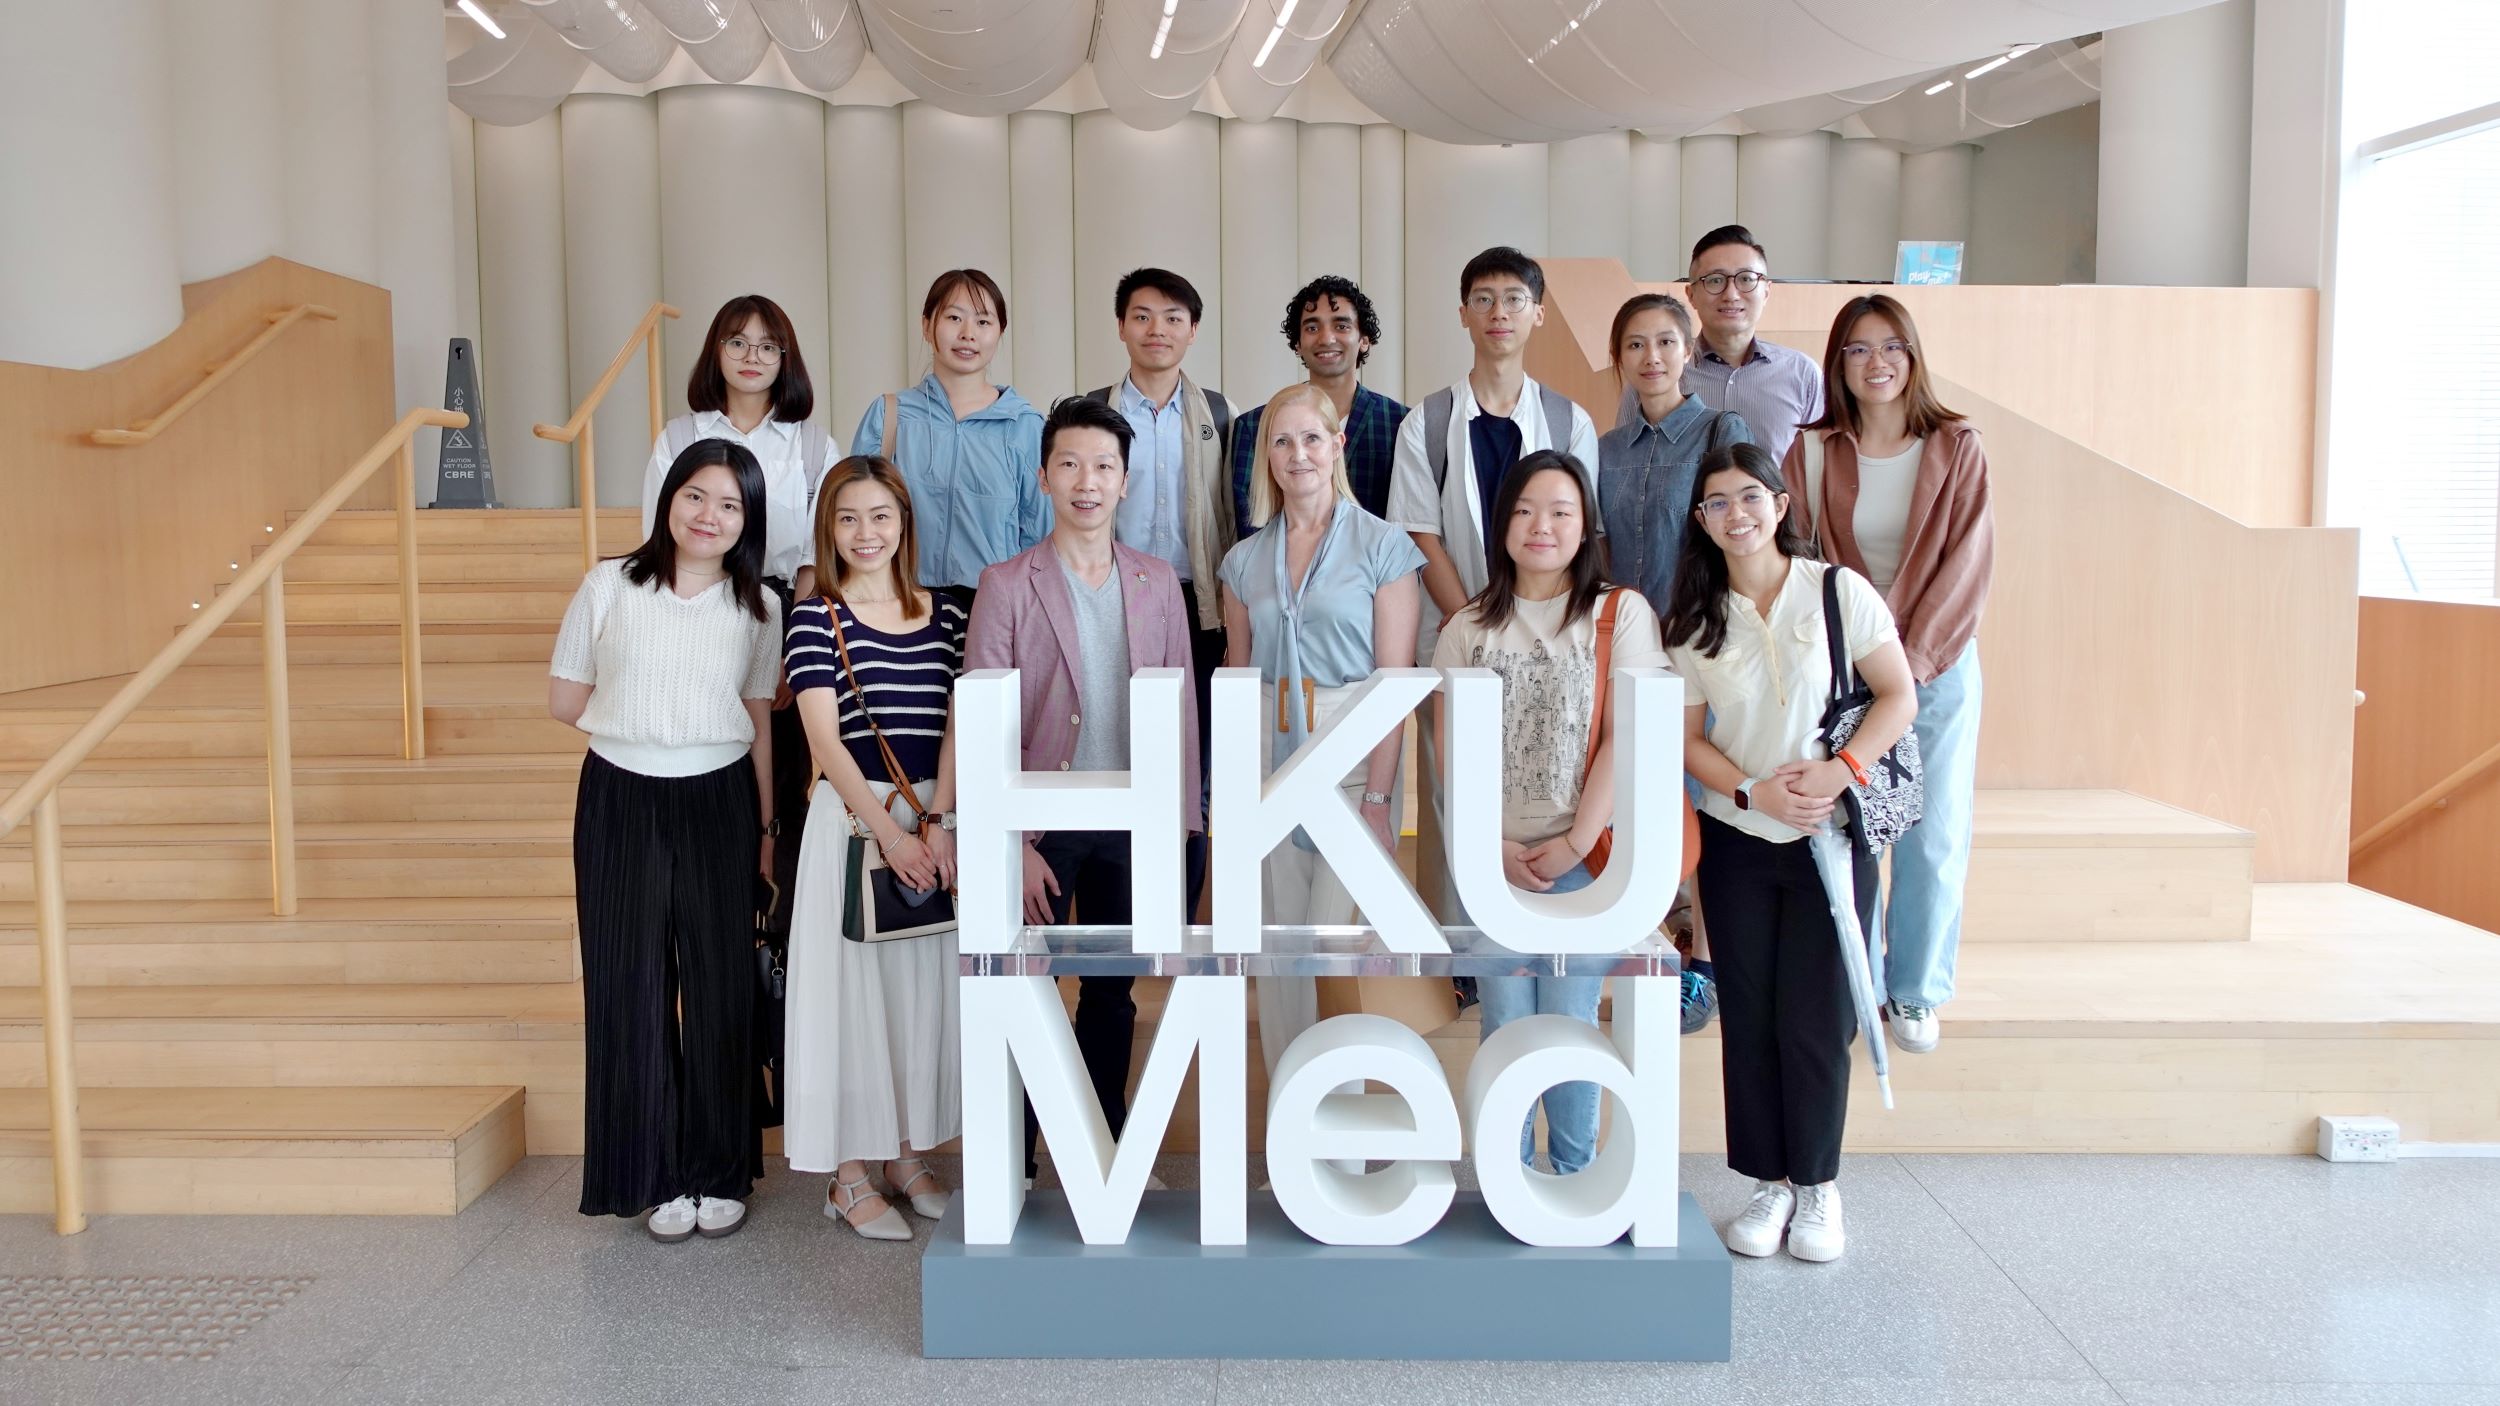 Visual Odyssey - The art of health messaging in HK - Group Photo